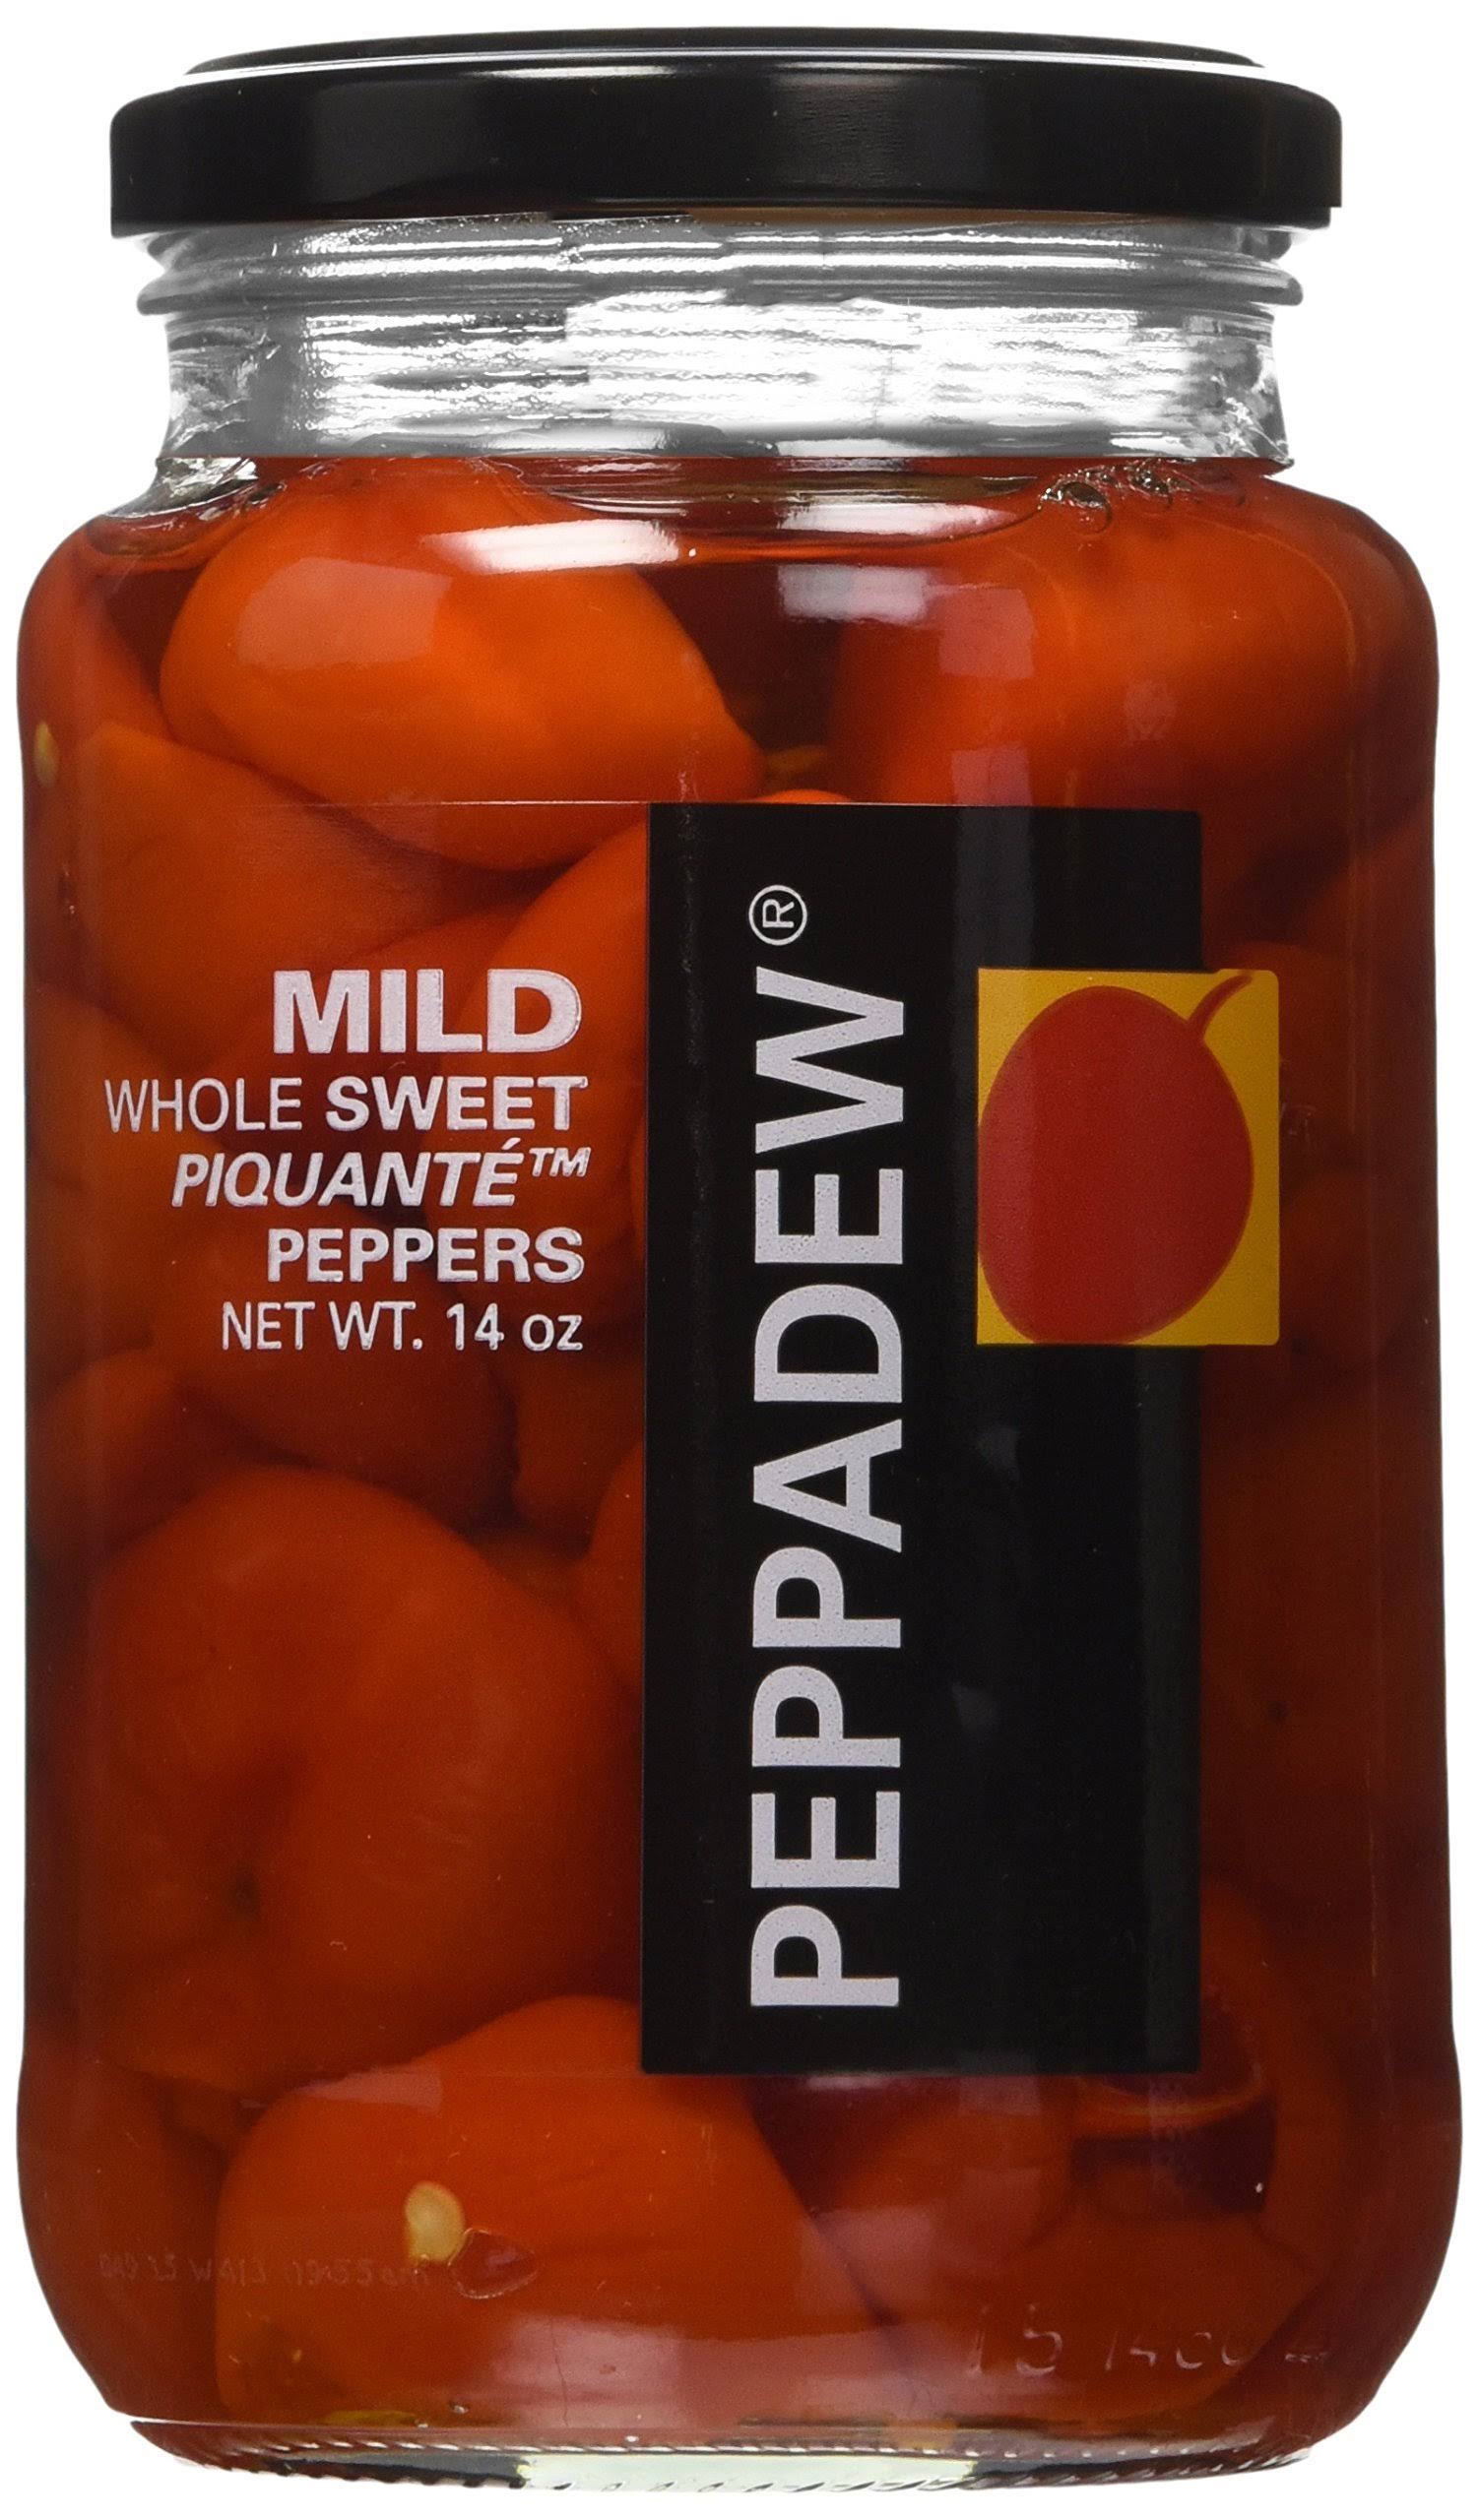 Peppadew Piquante Peppers Whole Sweet Mild - Pack of 6